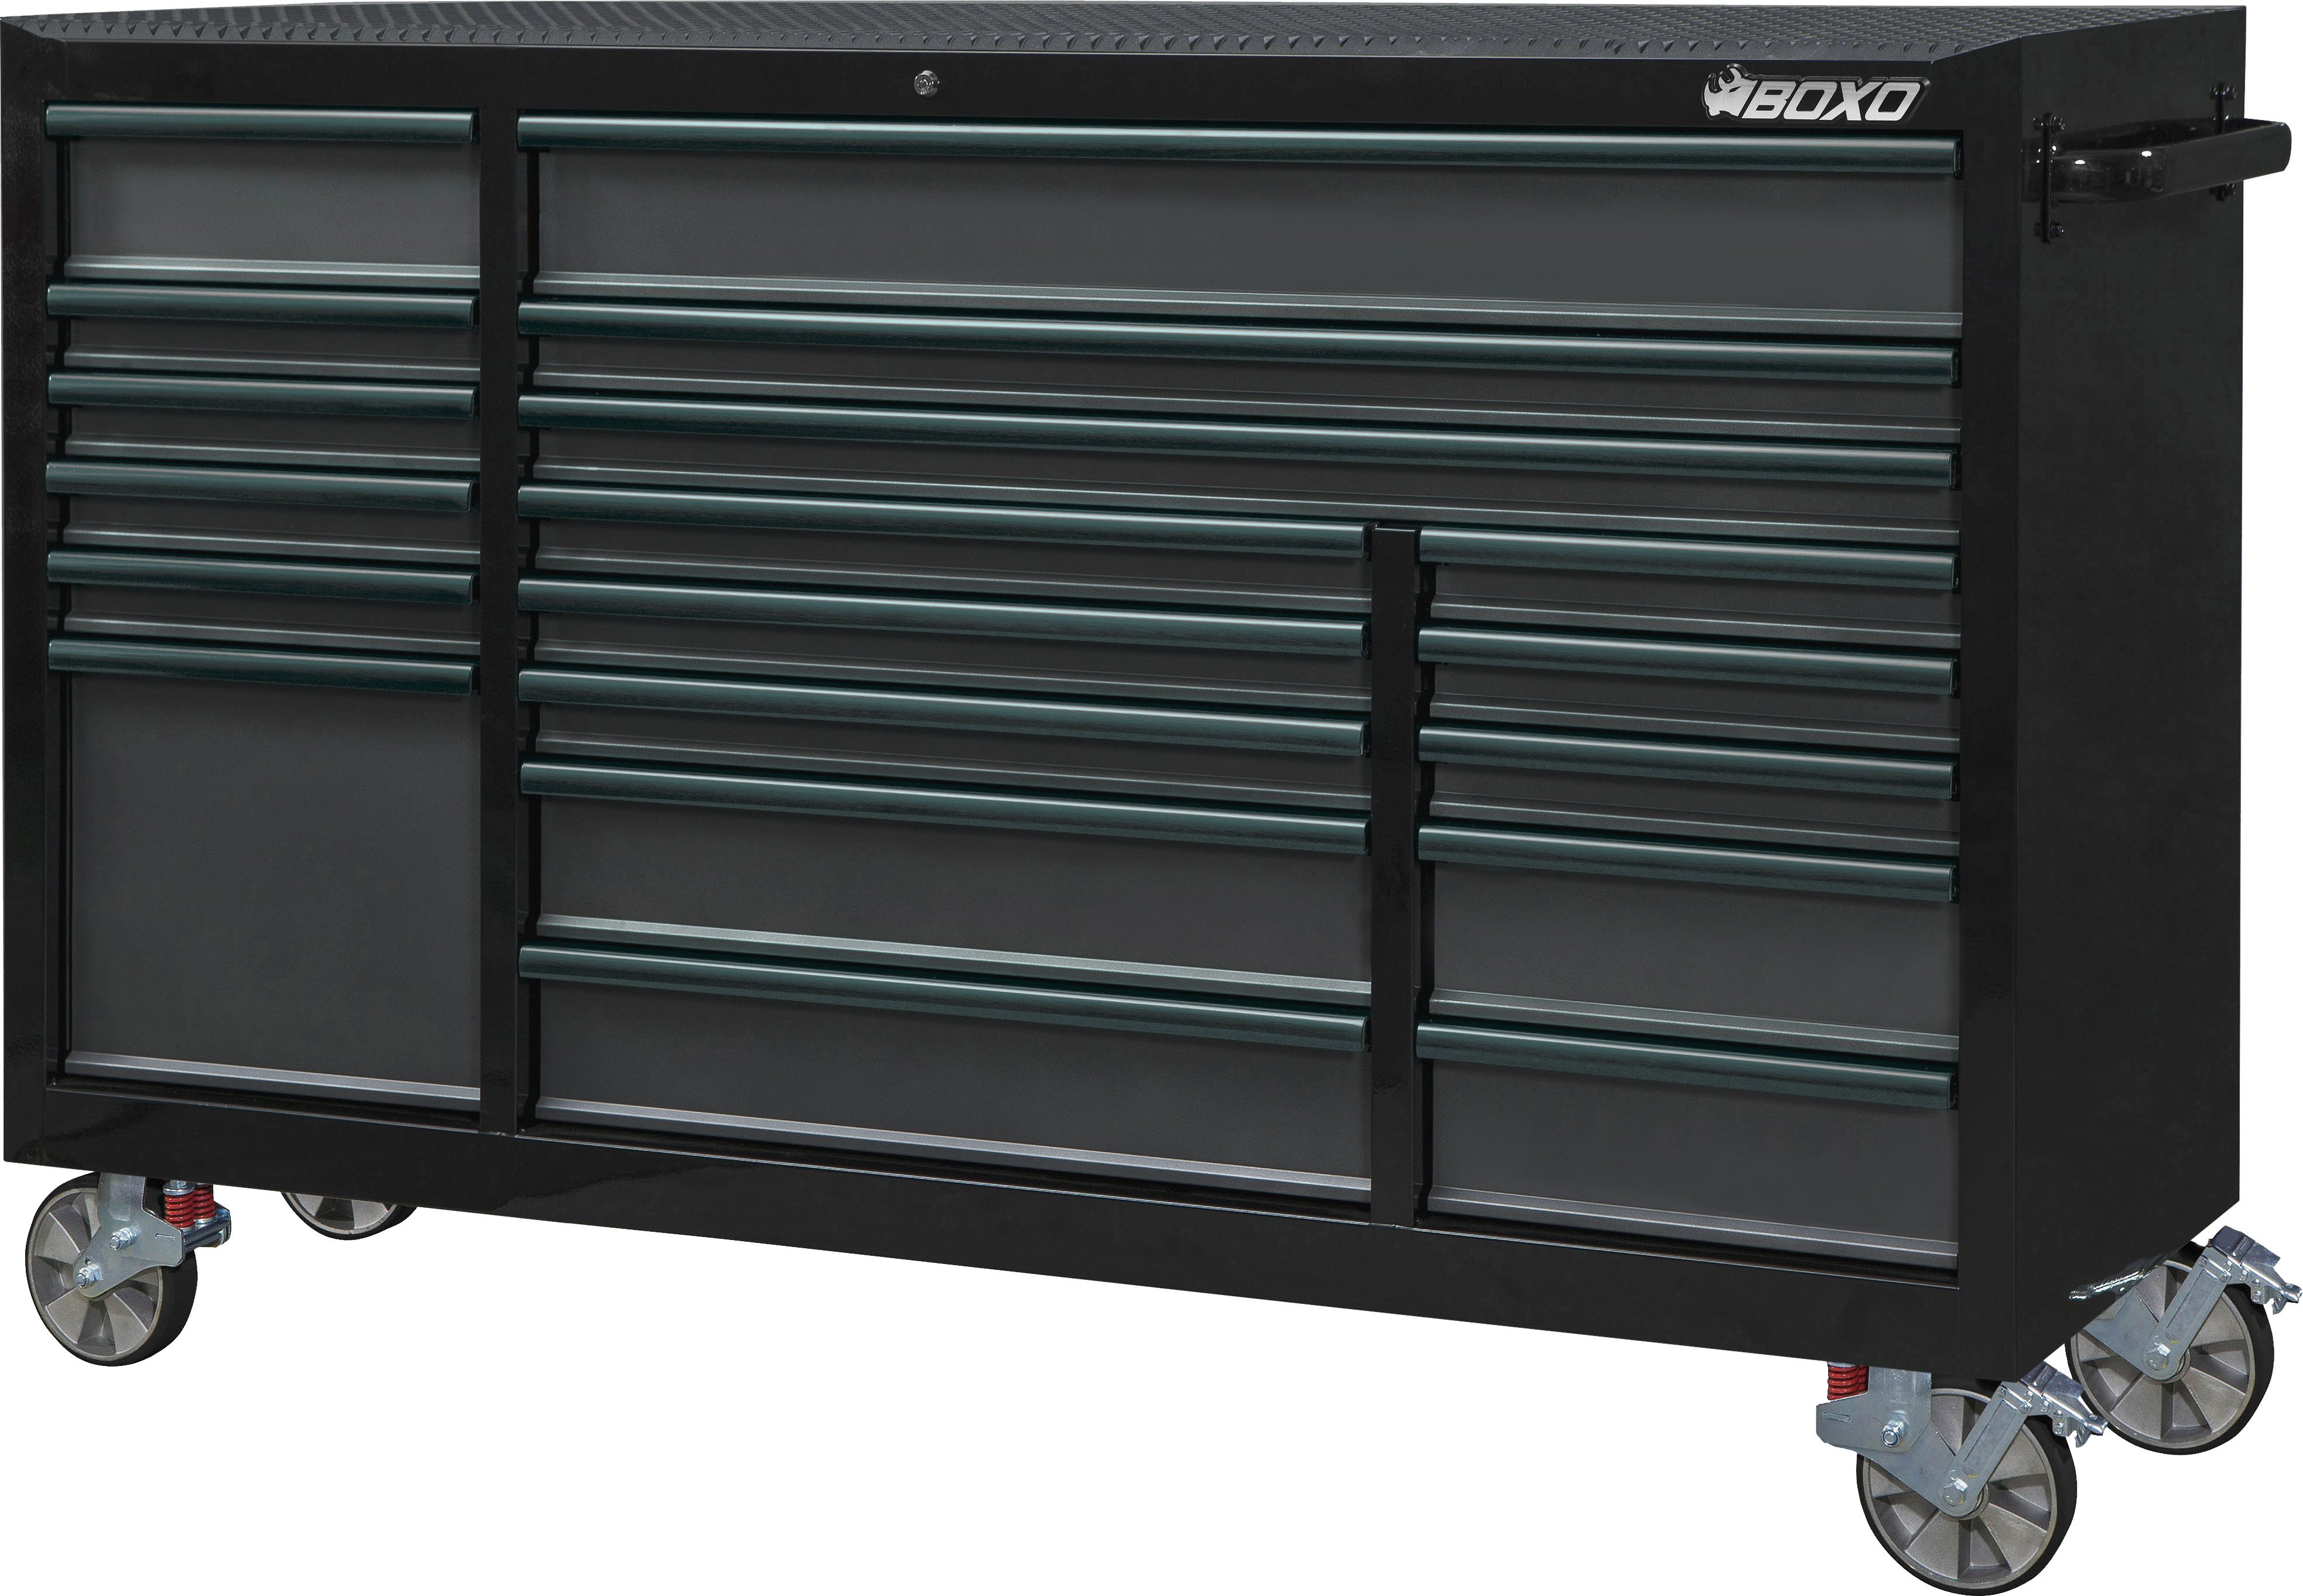 BOXO 72" 19 Drawer Triple Bank Roll Cabinet with Drawer Trim Pack - Black Body & Trim Colour Options